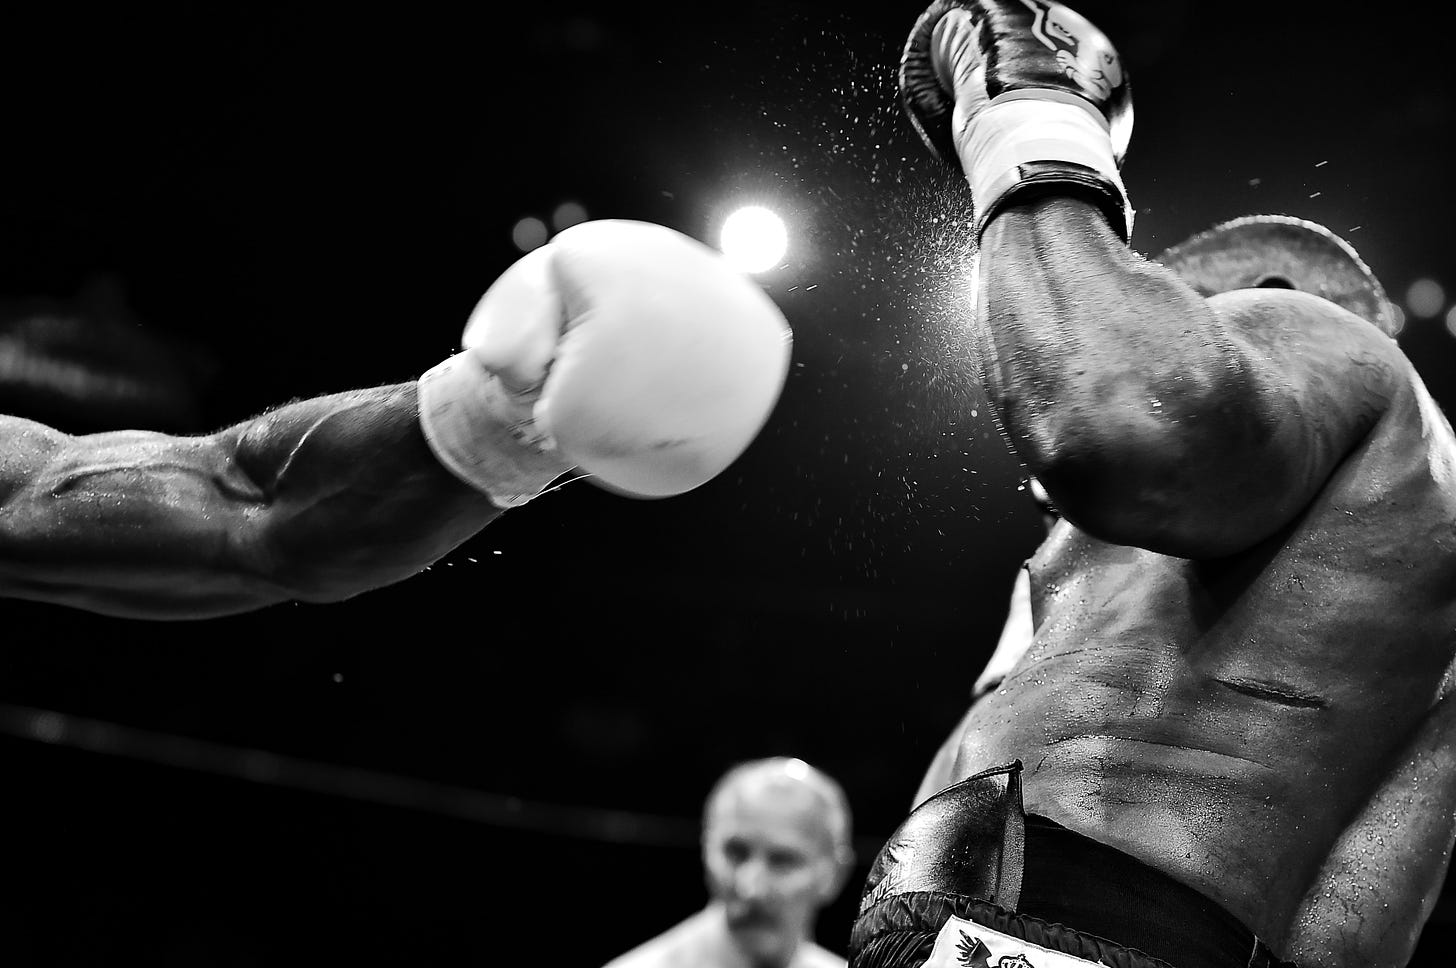 Boxer being hit by arm with white glove